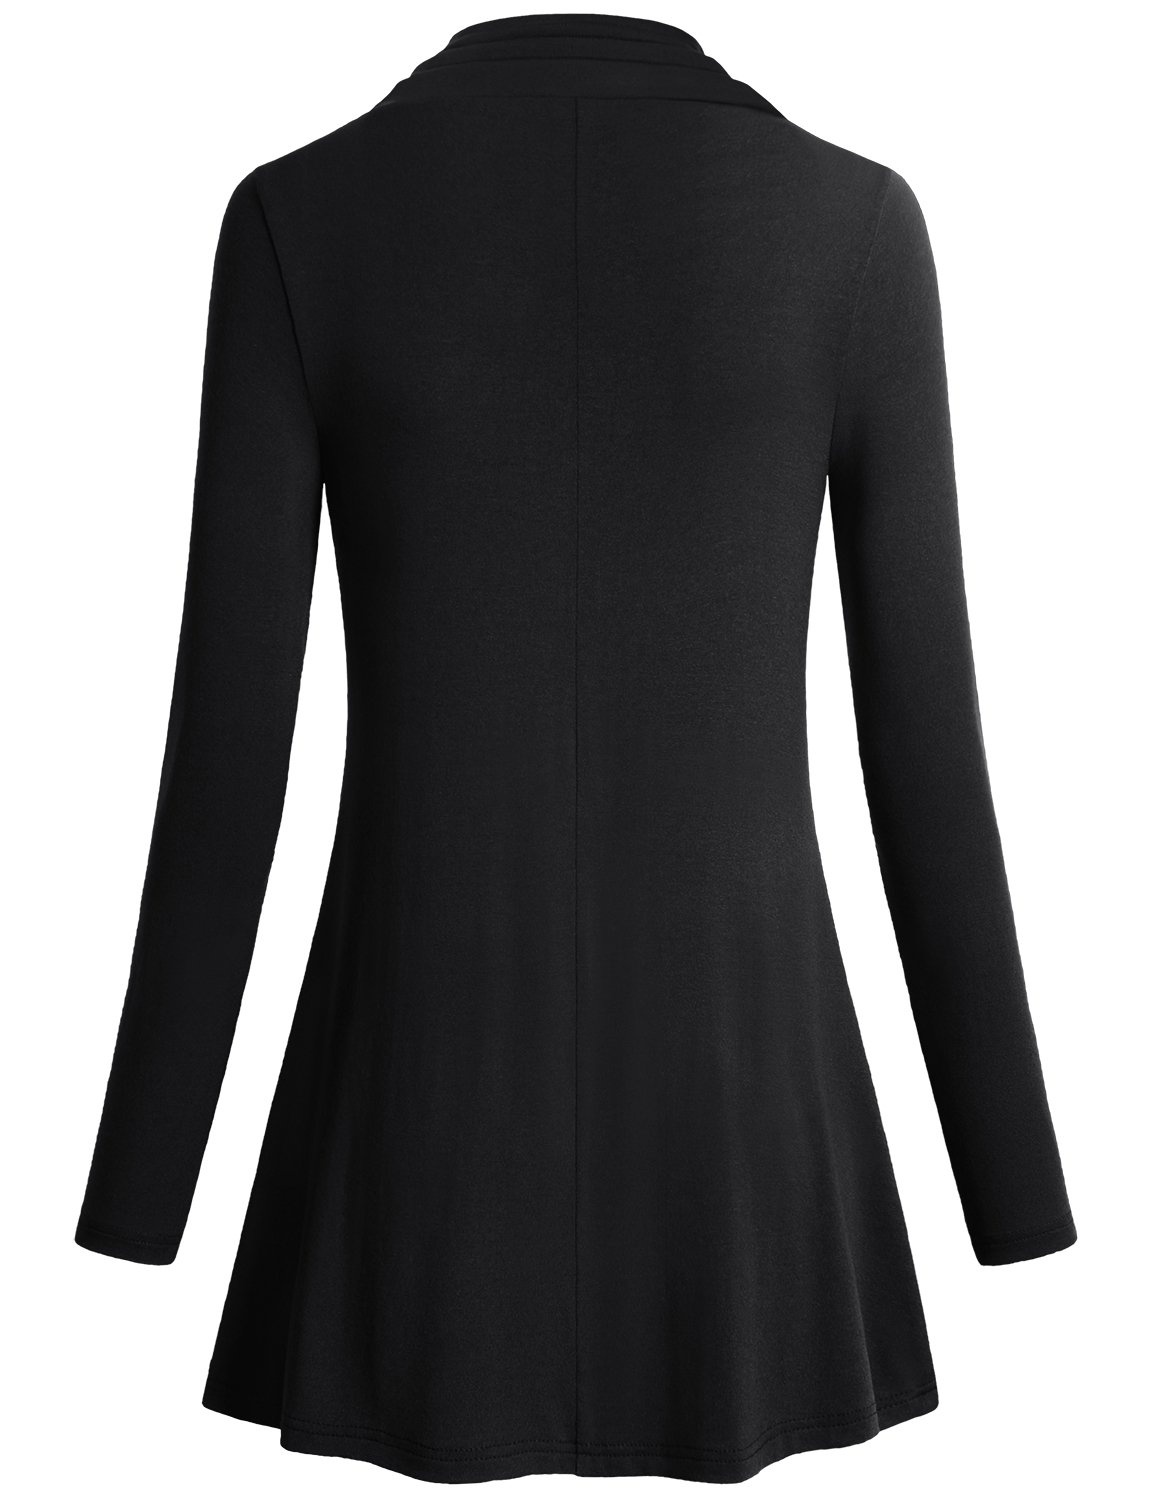 Miusey Women's Long Sleeve Cowl Neck Form Fitting Casual Tunic Top Blouse